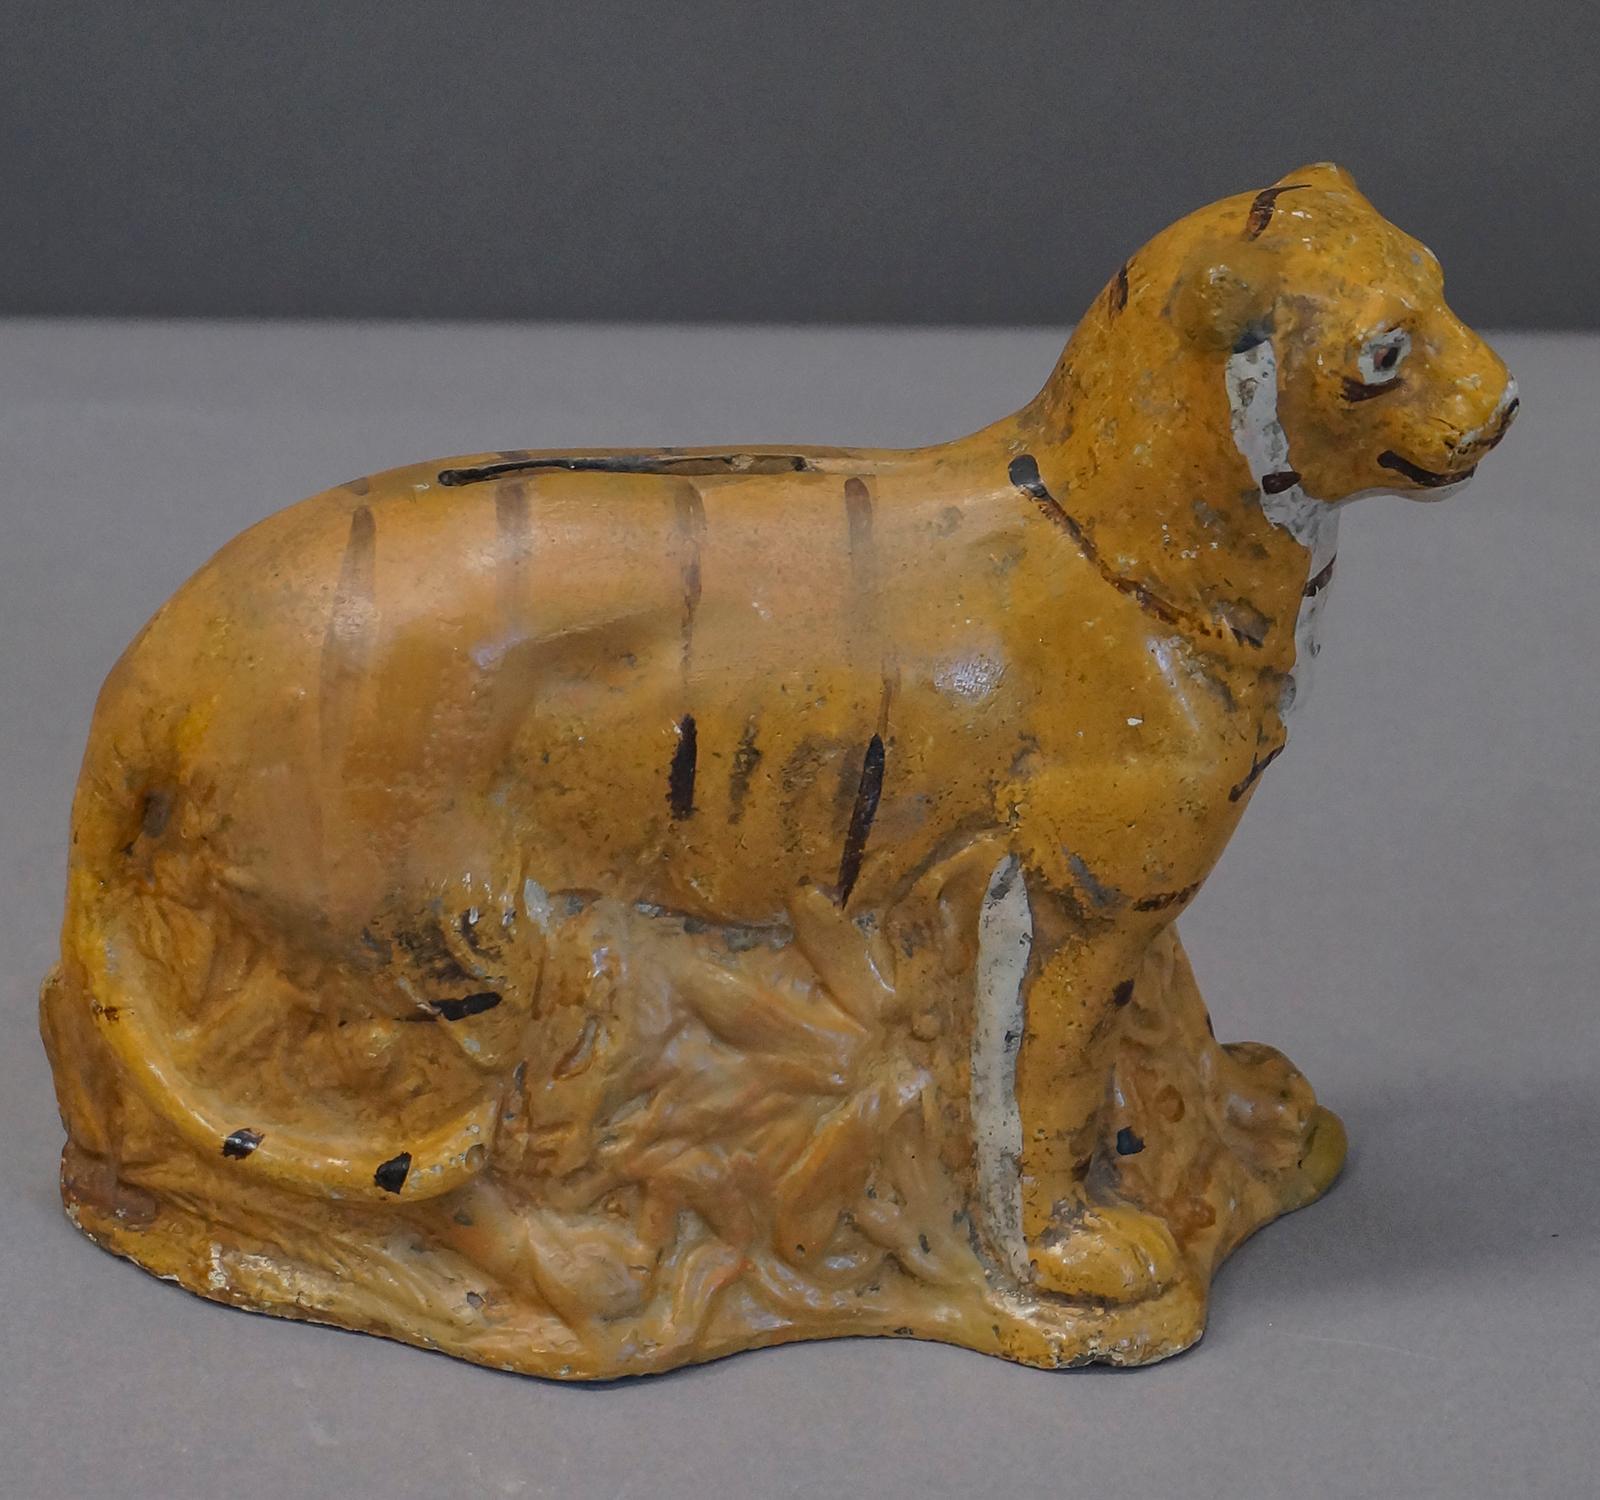 Chalkware bank in the shape of a tiger, circa 1880, from a private collection in Denmark.